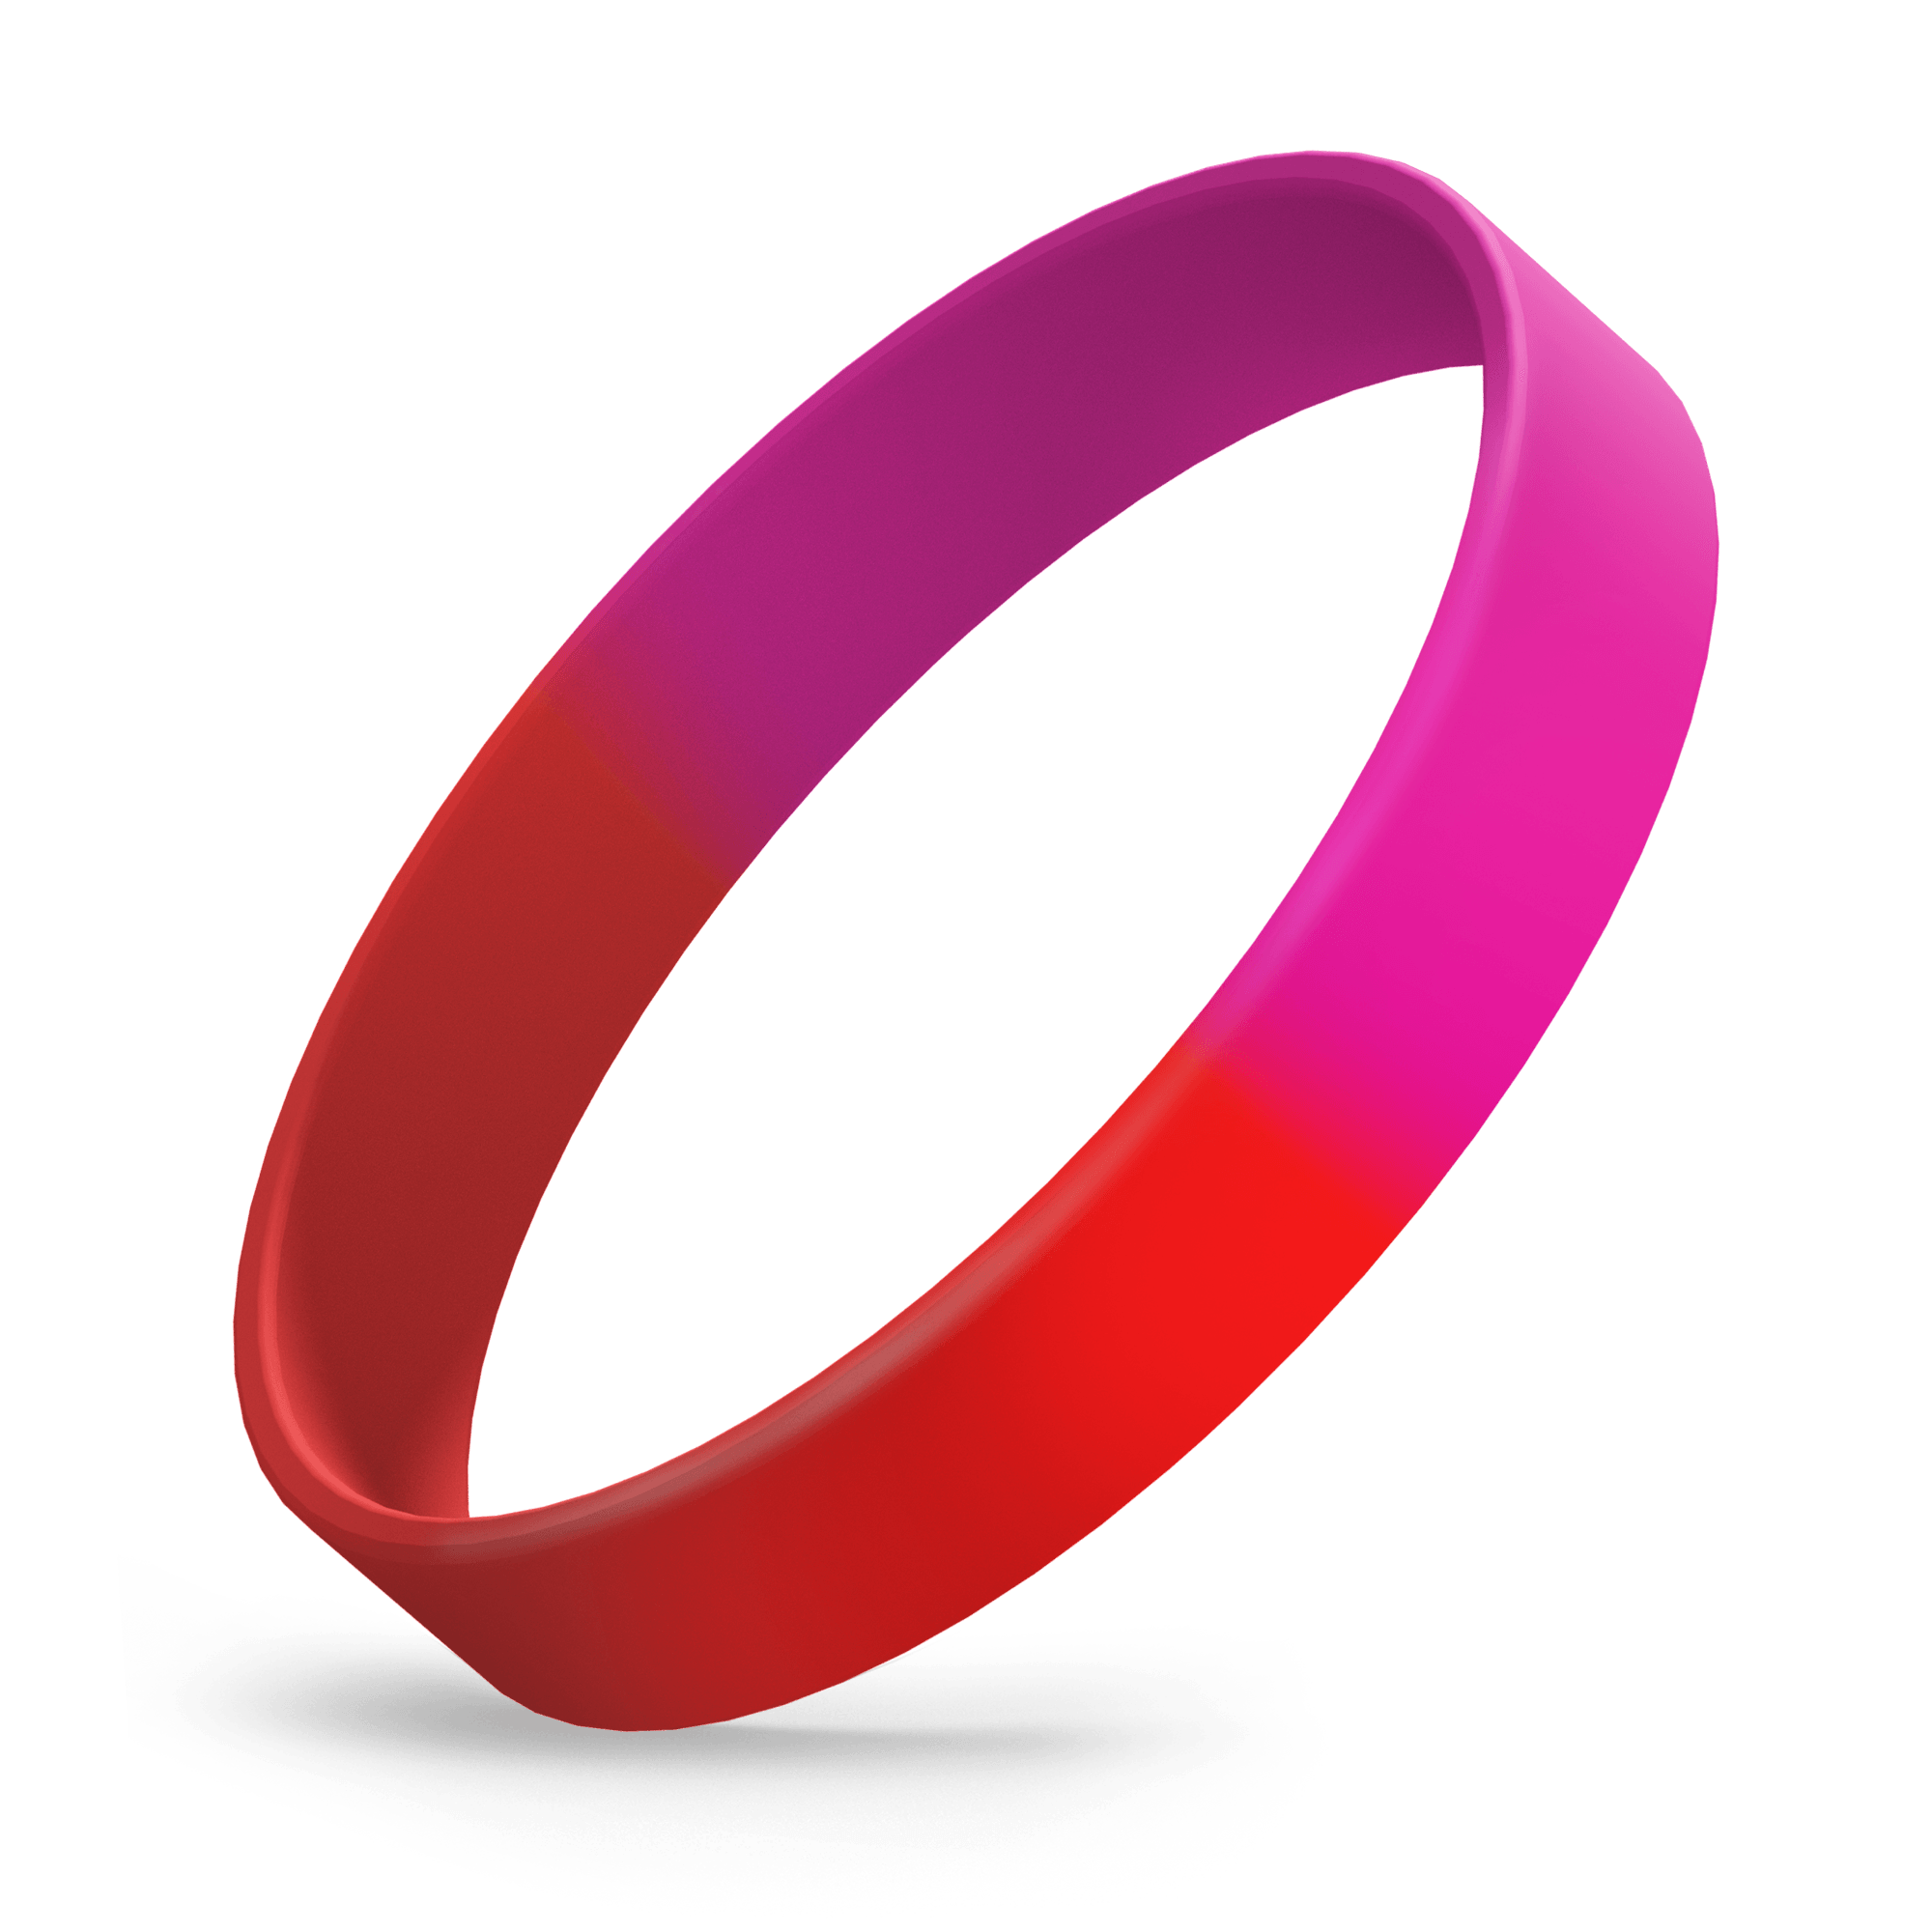 Custom Ink Injected (Red / Hot Pink Segmented) Silicone Wristbands - Rubber Bracelets